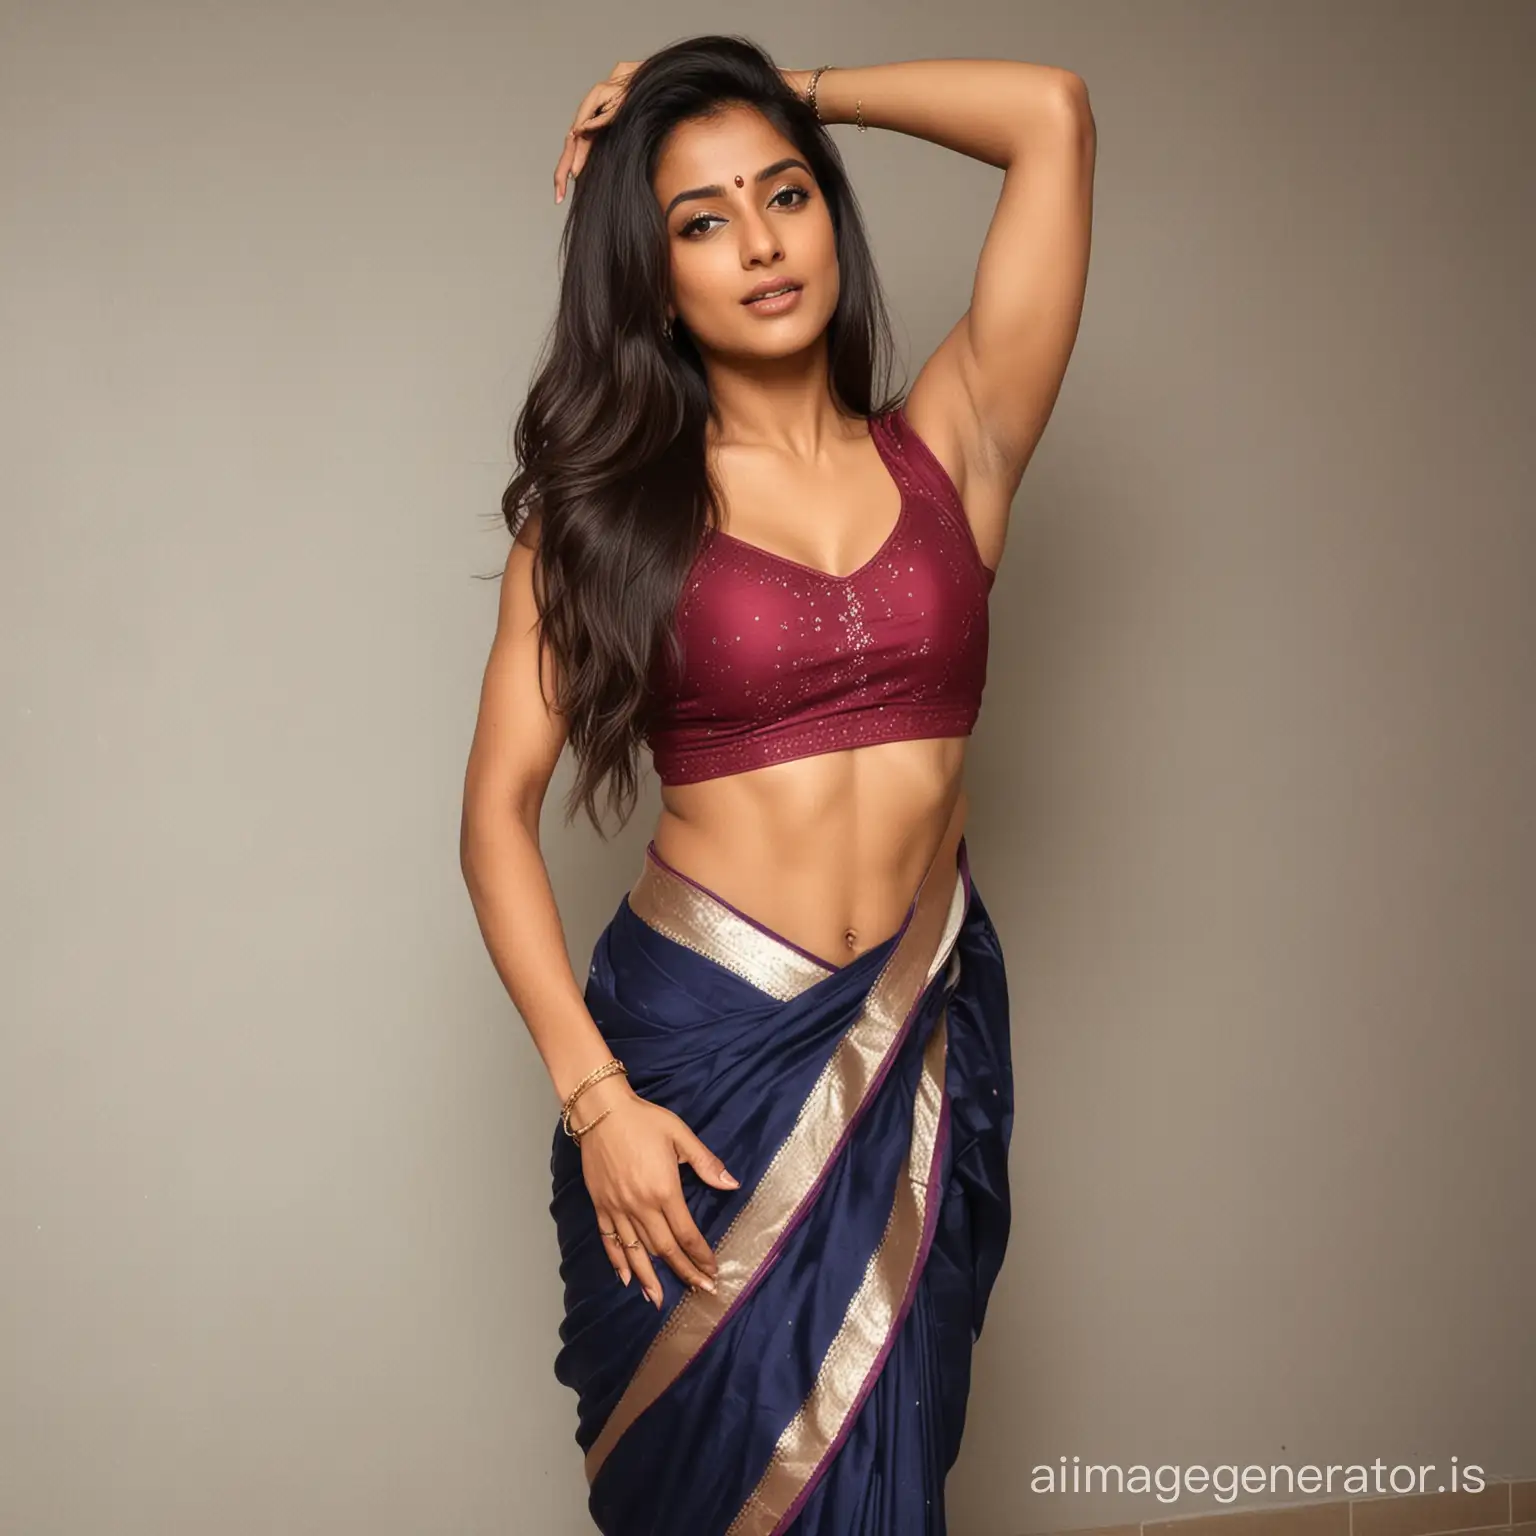 Indian-Girl-in-Traditional-Sari-with-Toned-Abs-and-Long-Flowing-Hair